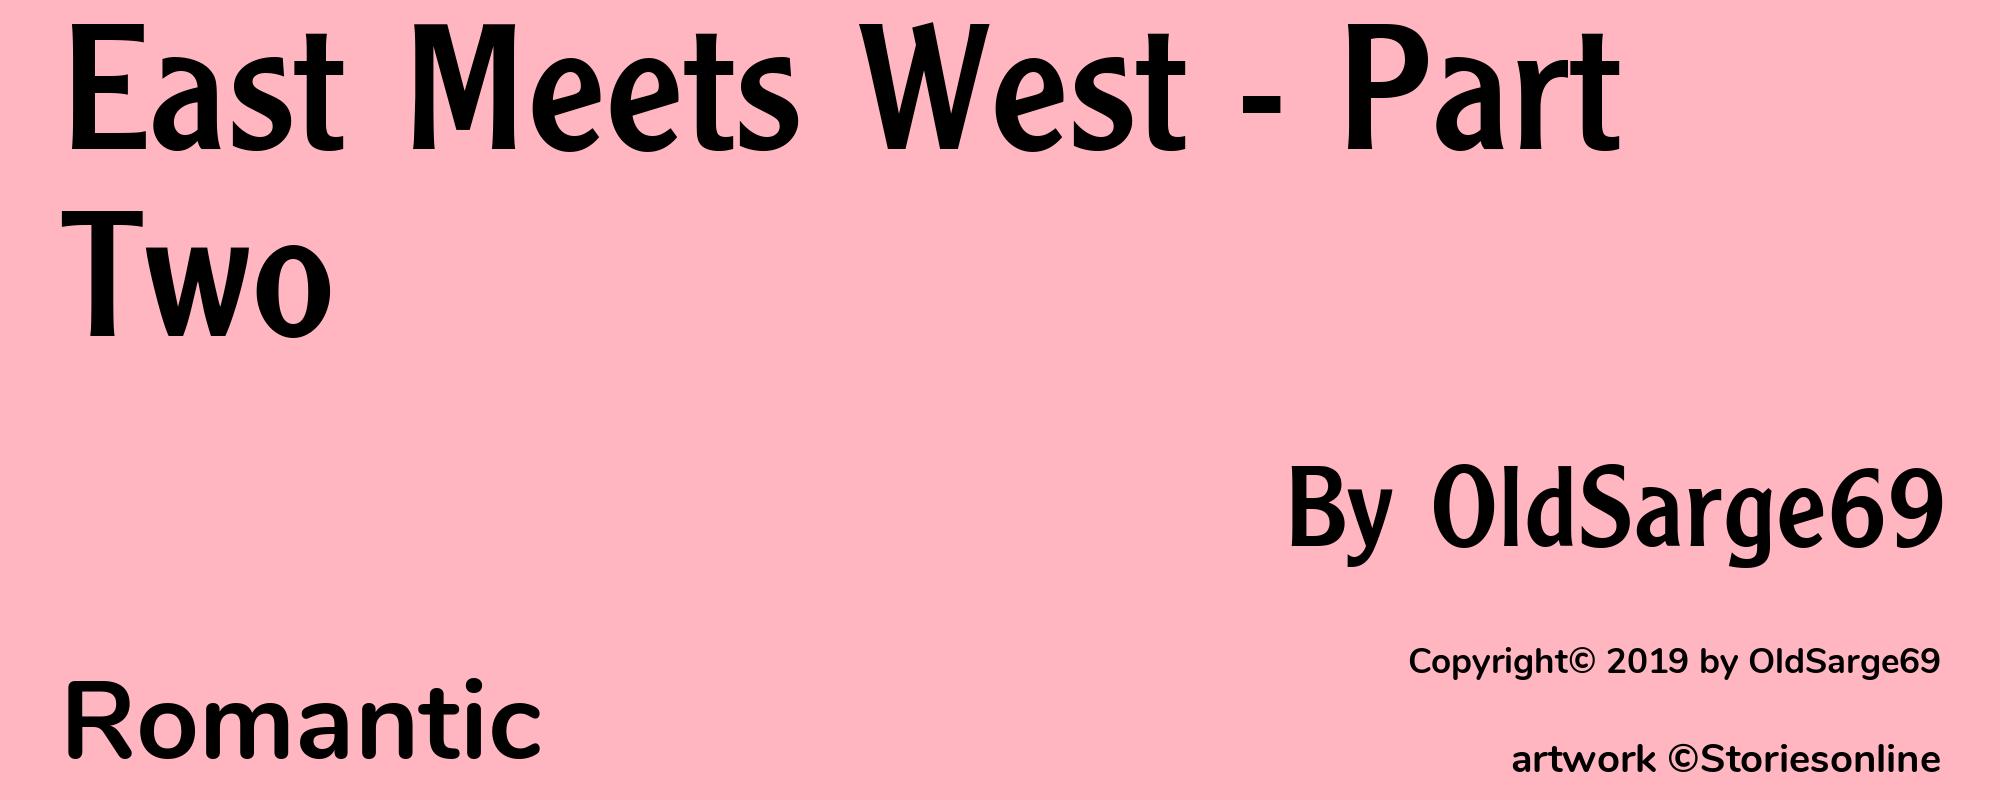 East Meets West - Part Two - Cover